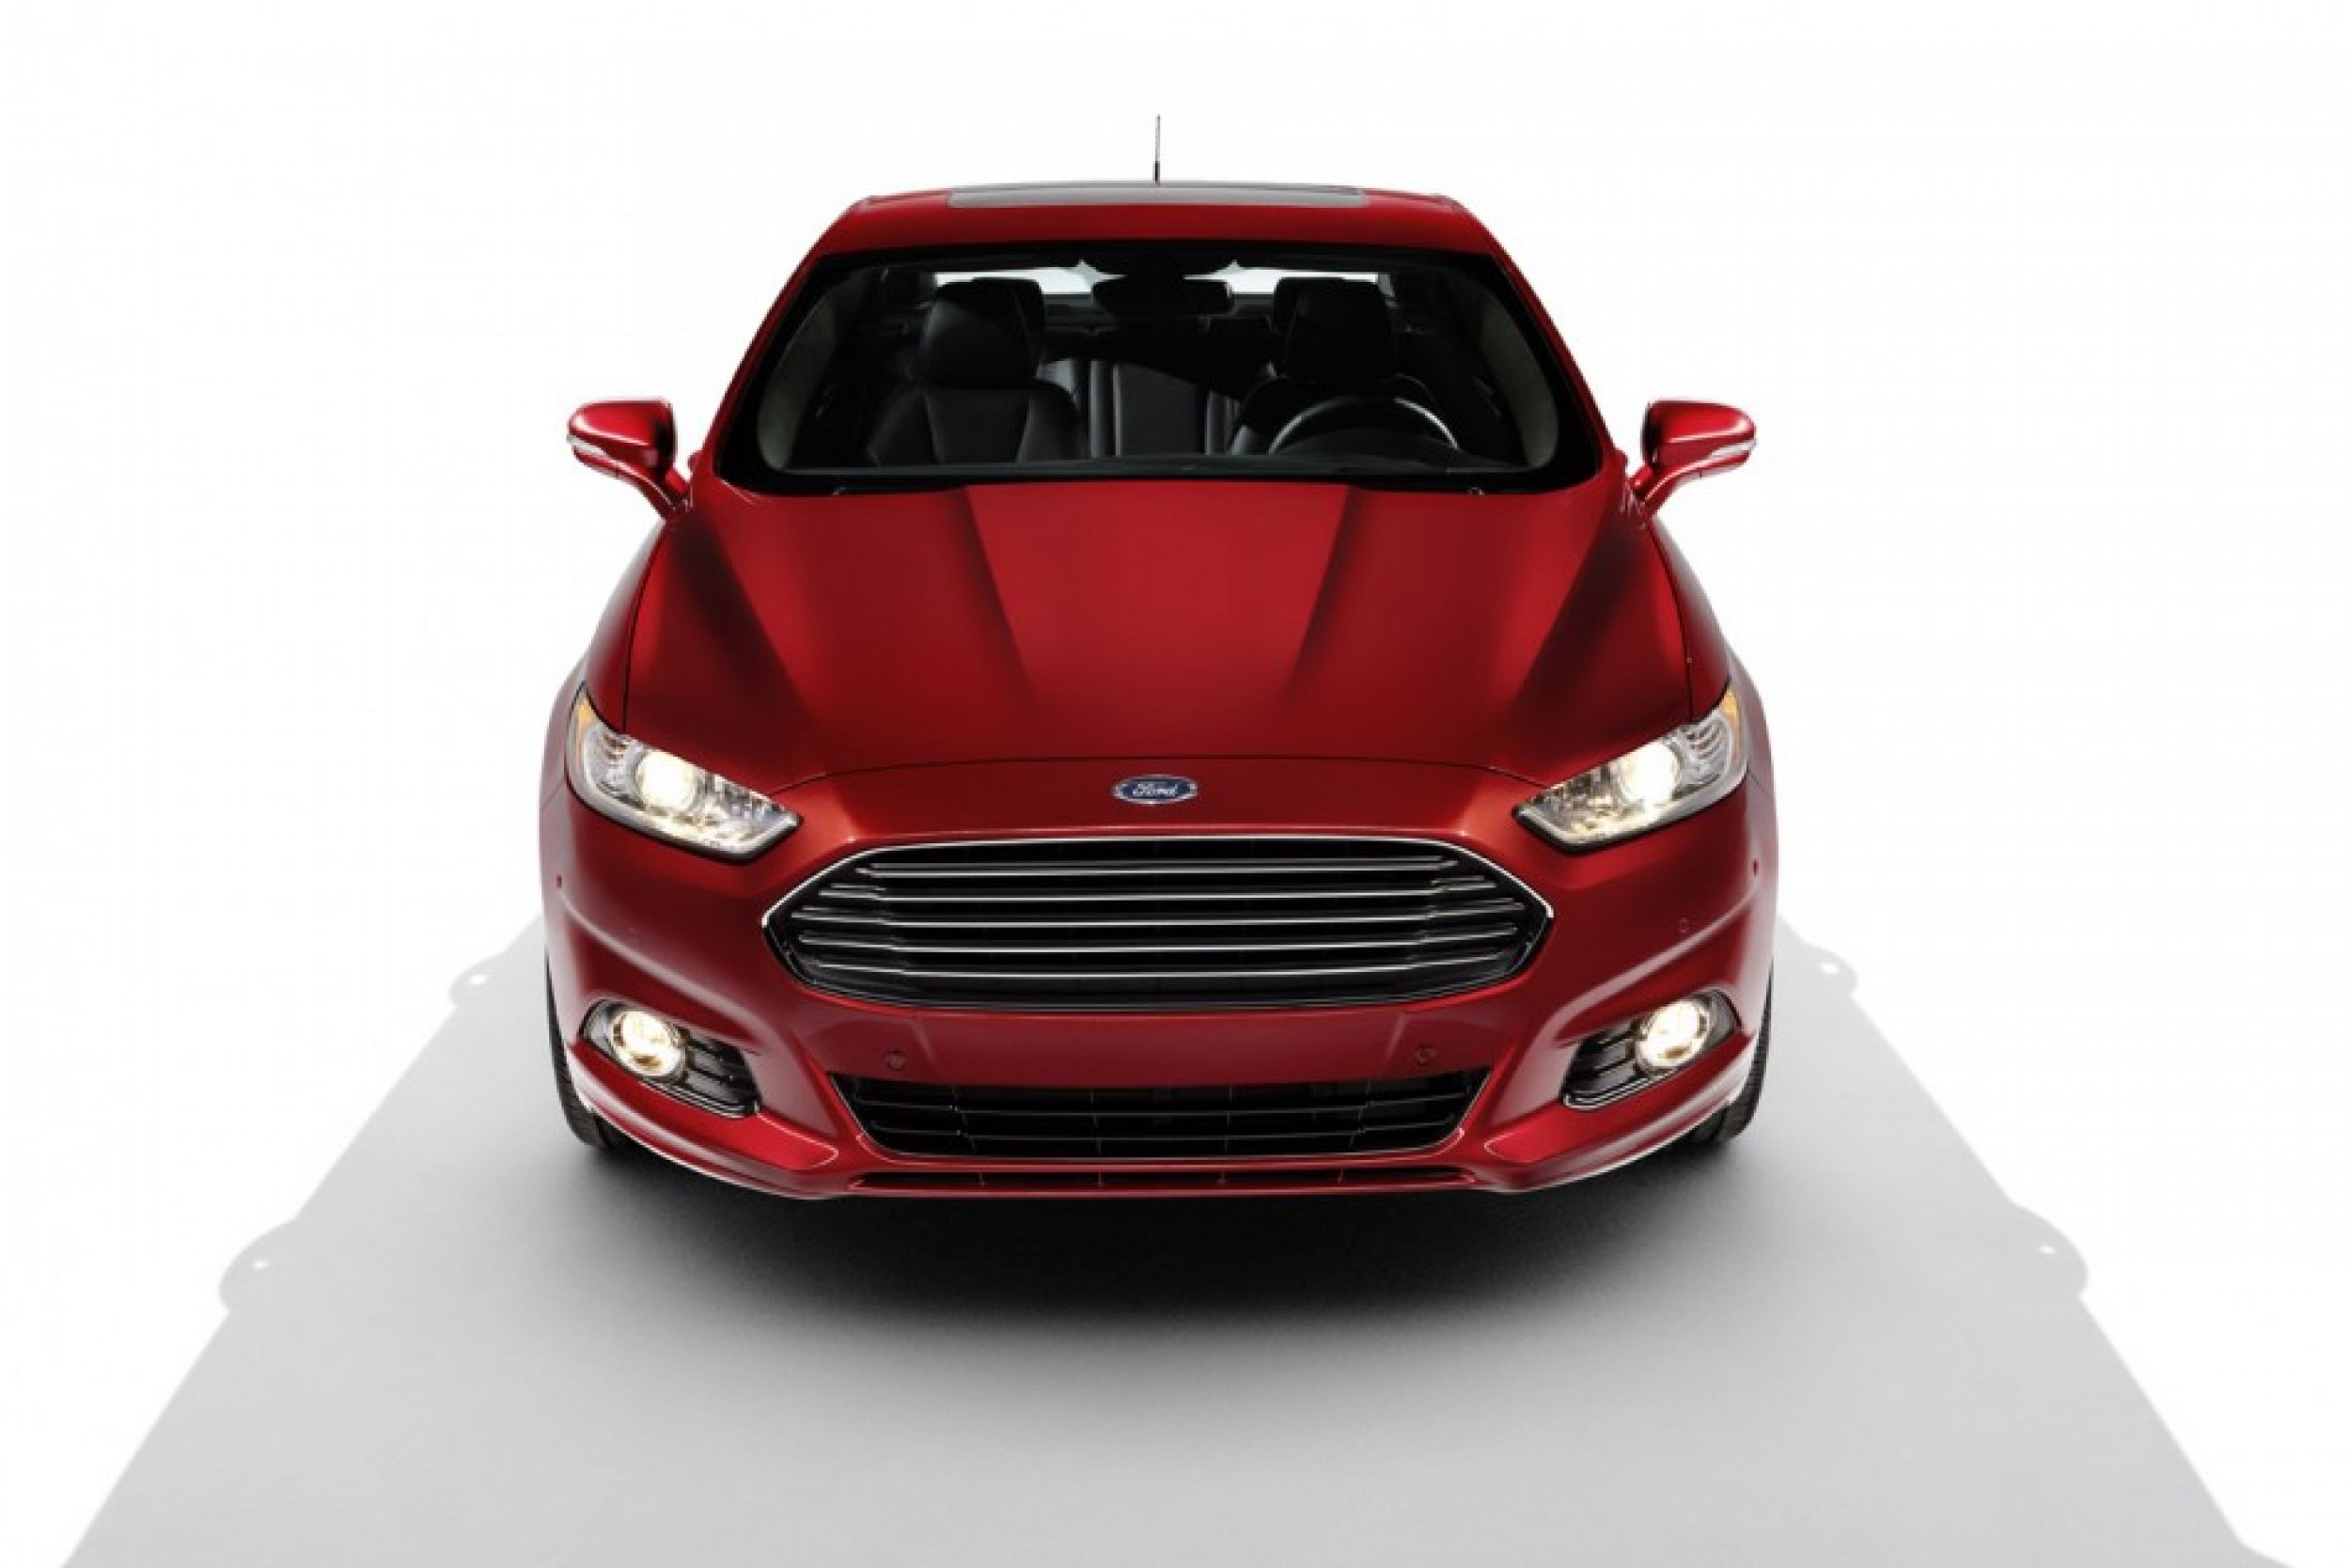 Ford Q2 2013 Earnings Preview Watch For Special Charges Related To